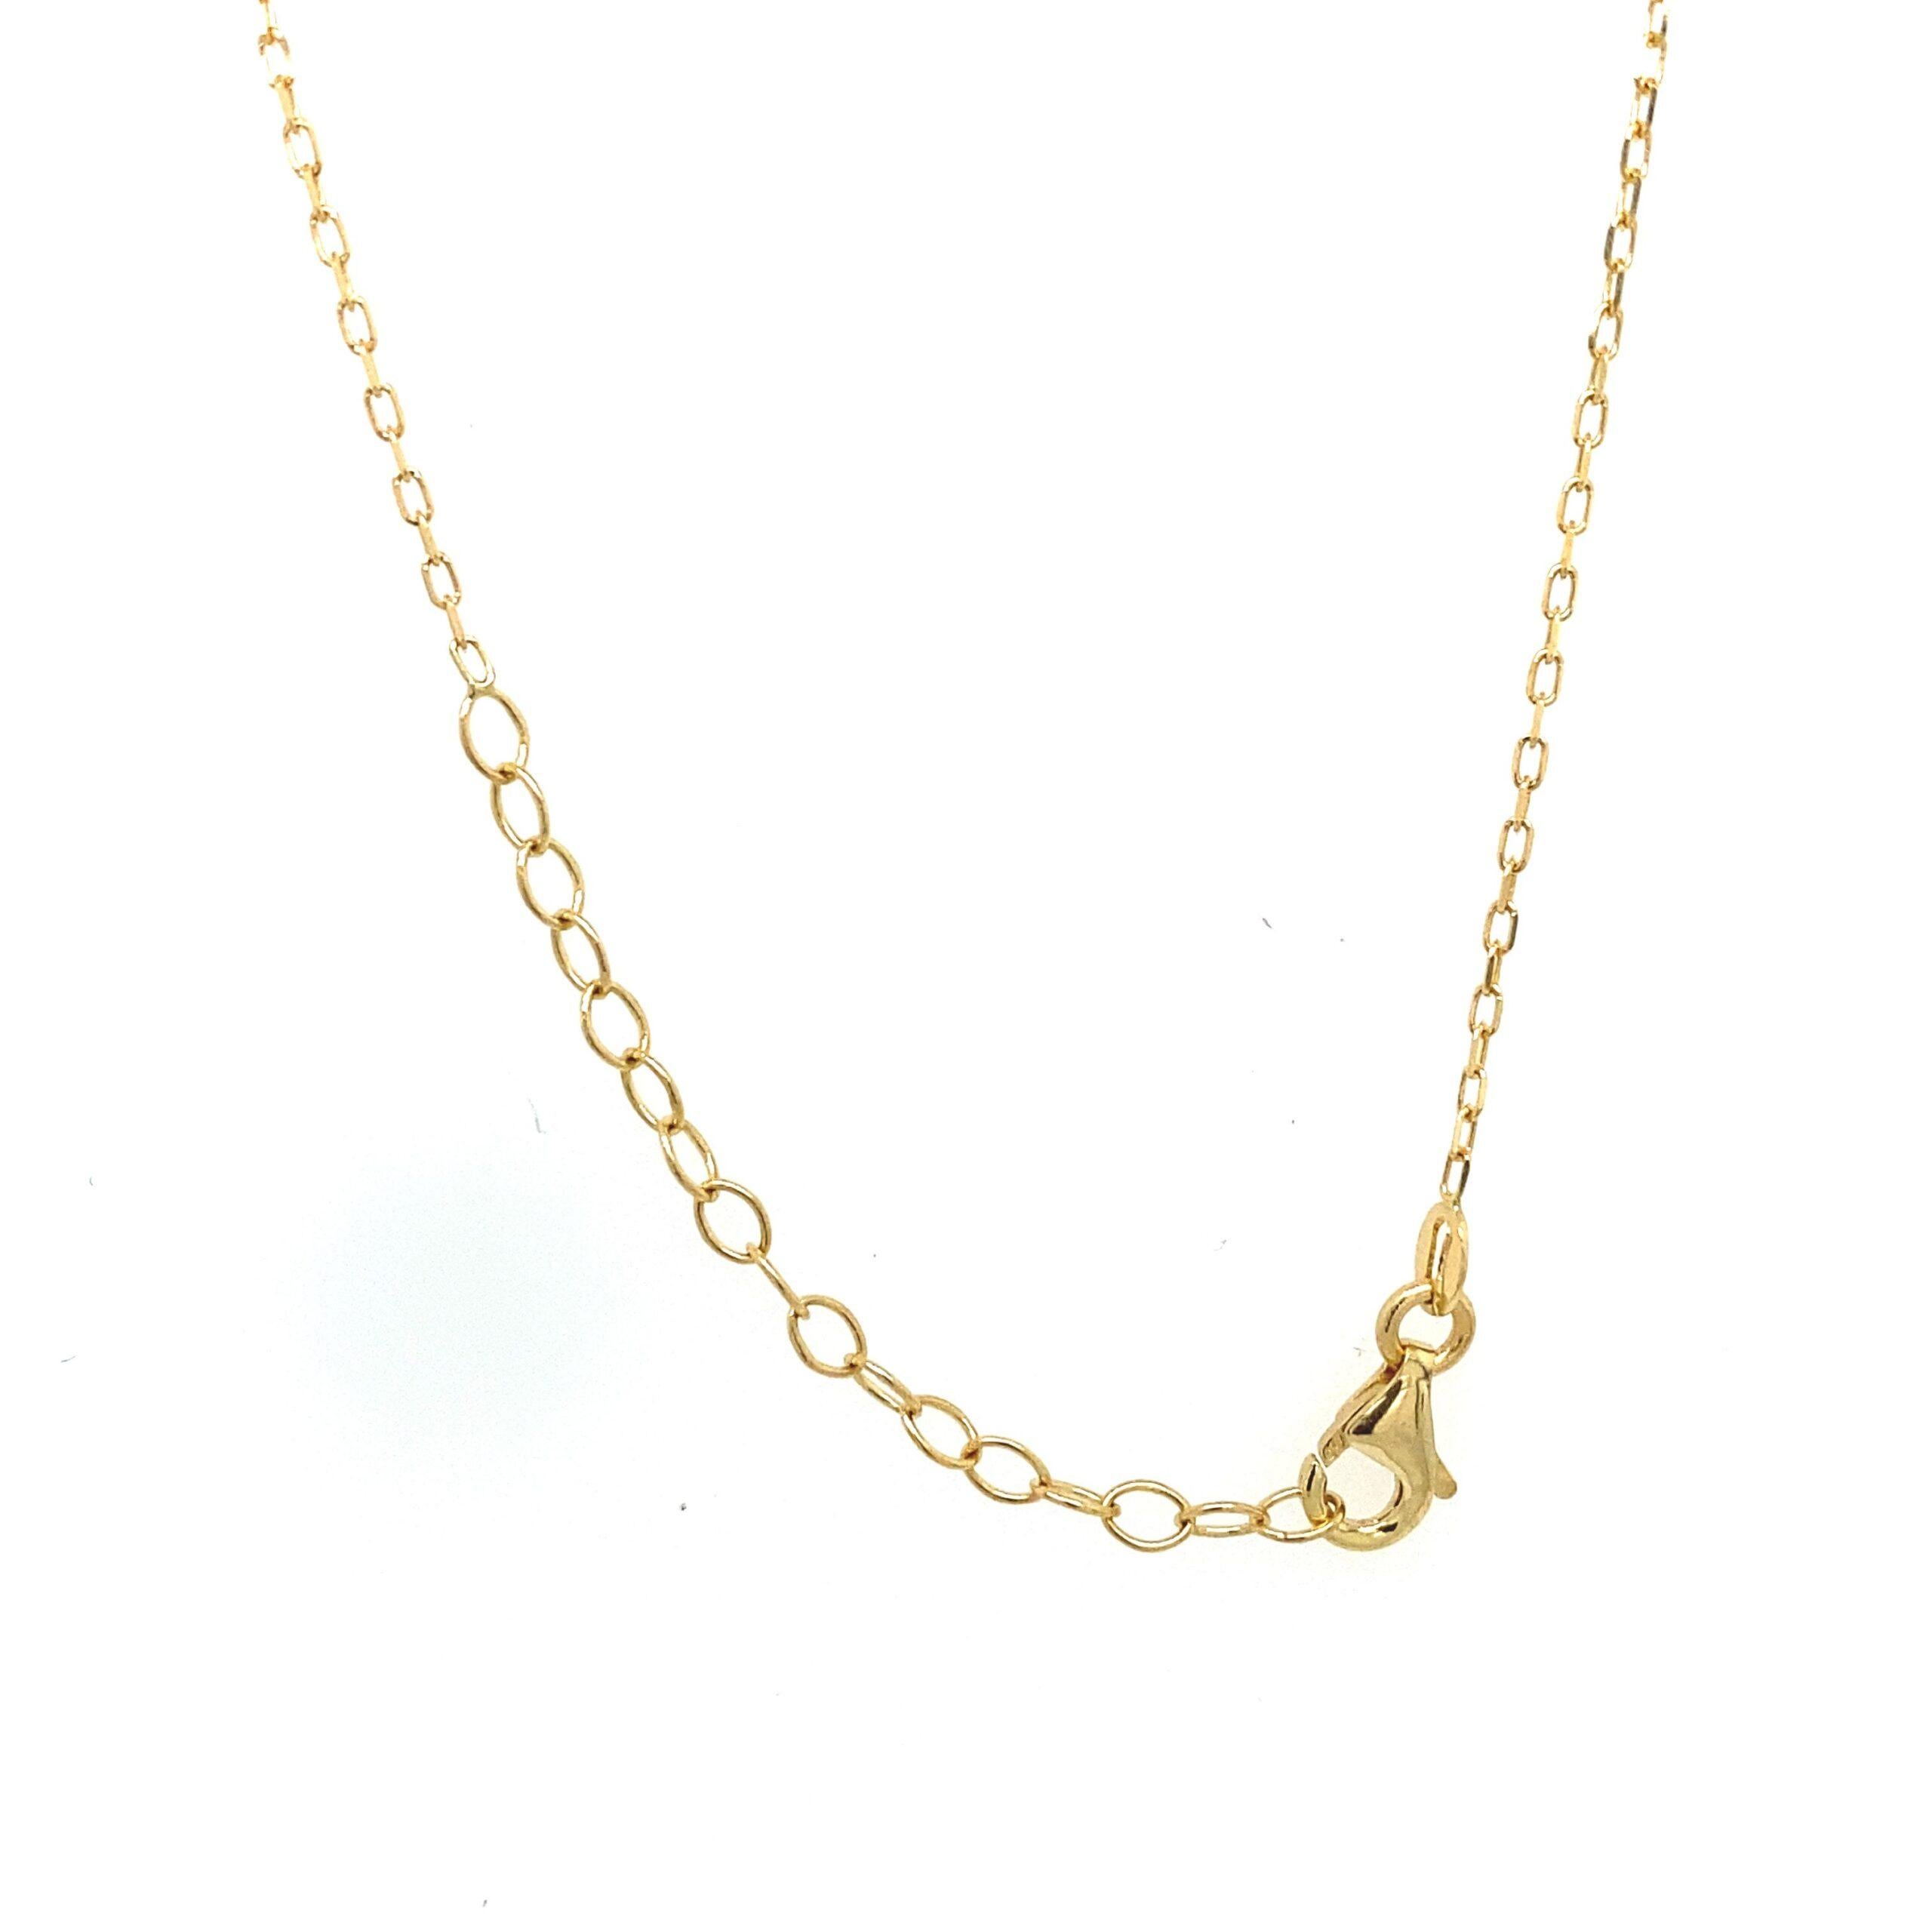 18ct Yellow Gold “LOVE” Pendant On 17″ Chain.

Additional Information:
Total Weight : 2.5g
Chain Length: 17